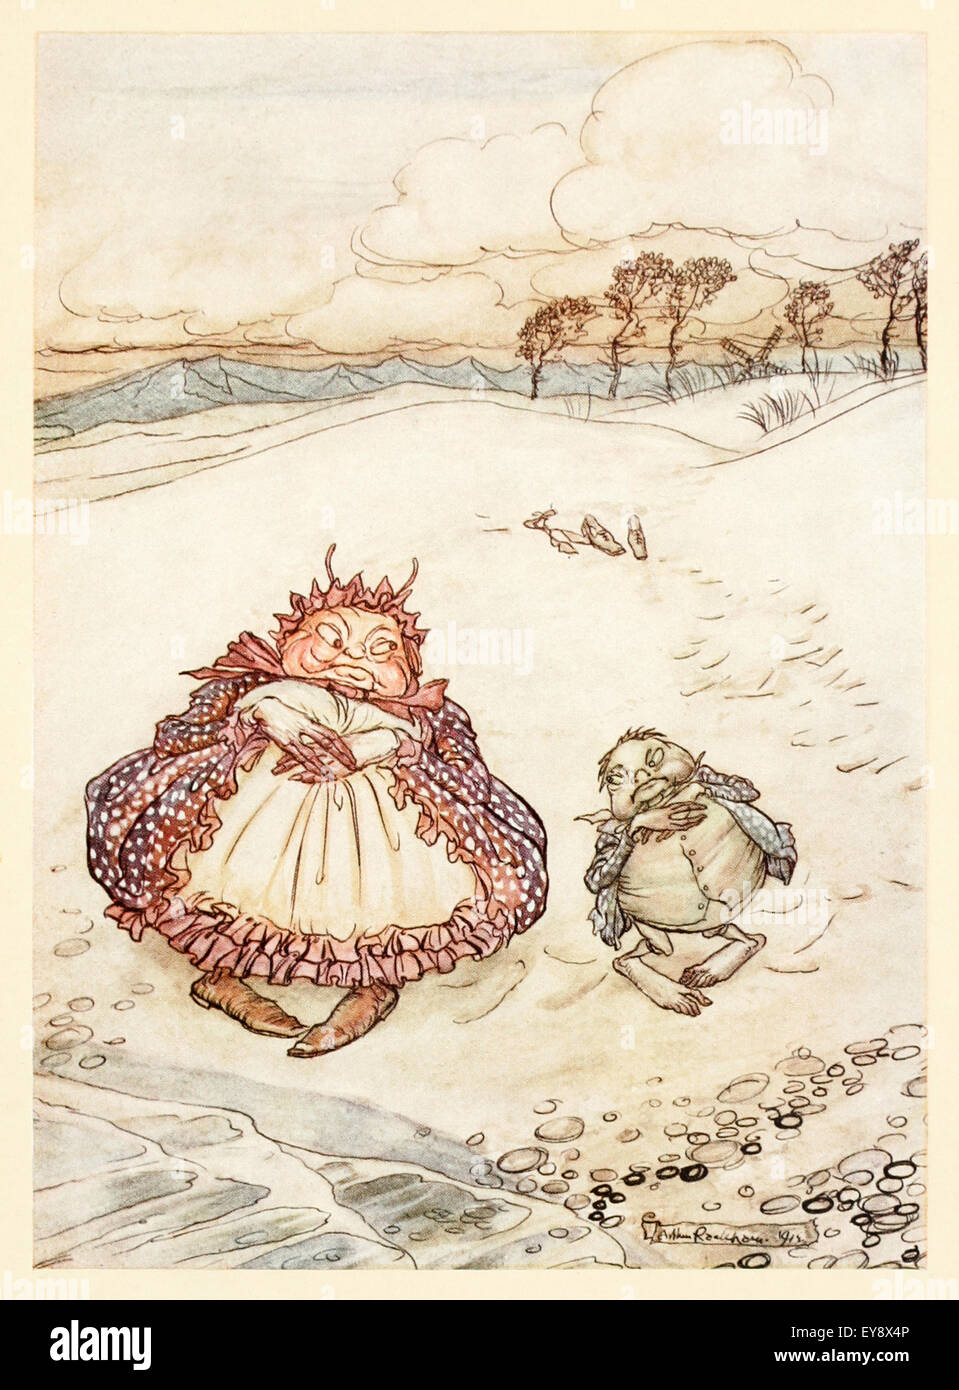 'The Crab and his Mother' fable by Aesop (circa 600BC). A child crab is berated by the parent crab for walking awkwardly. The child crab points out the parent should set the example. Example is the best precept. Illustration by Arthur Rackham (1867-1939). See description for more information. Stock Photo